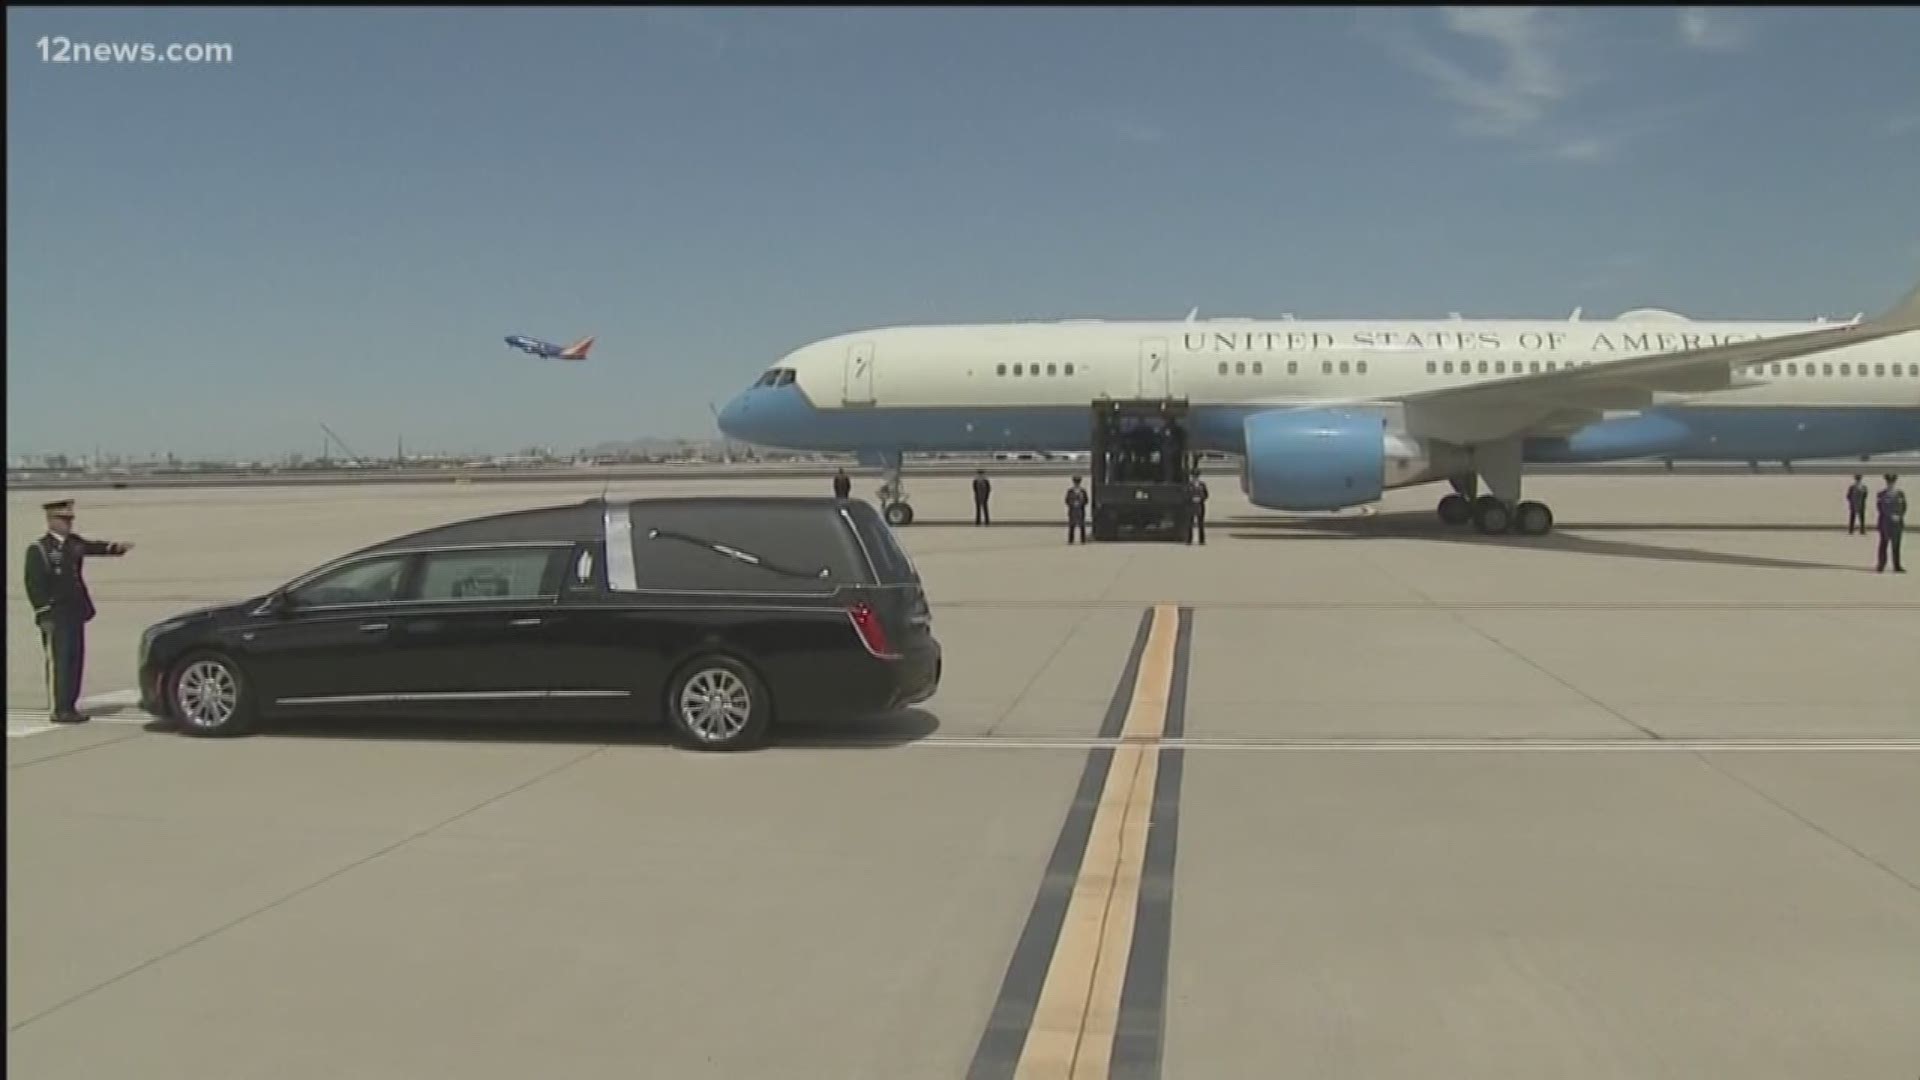 A last farewell to Arizona as the casket of John McCain departs from Phoenix Sky Harbor to lie in state at the U.S. State Capitol in Washington, D.C.